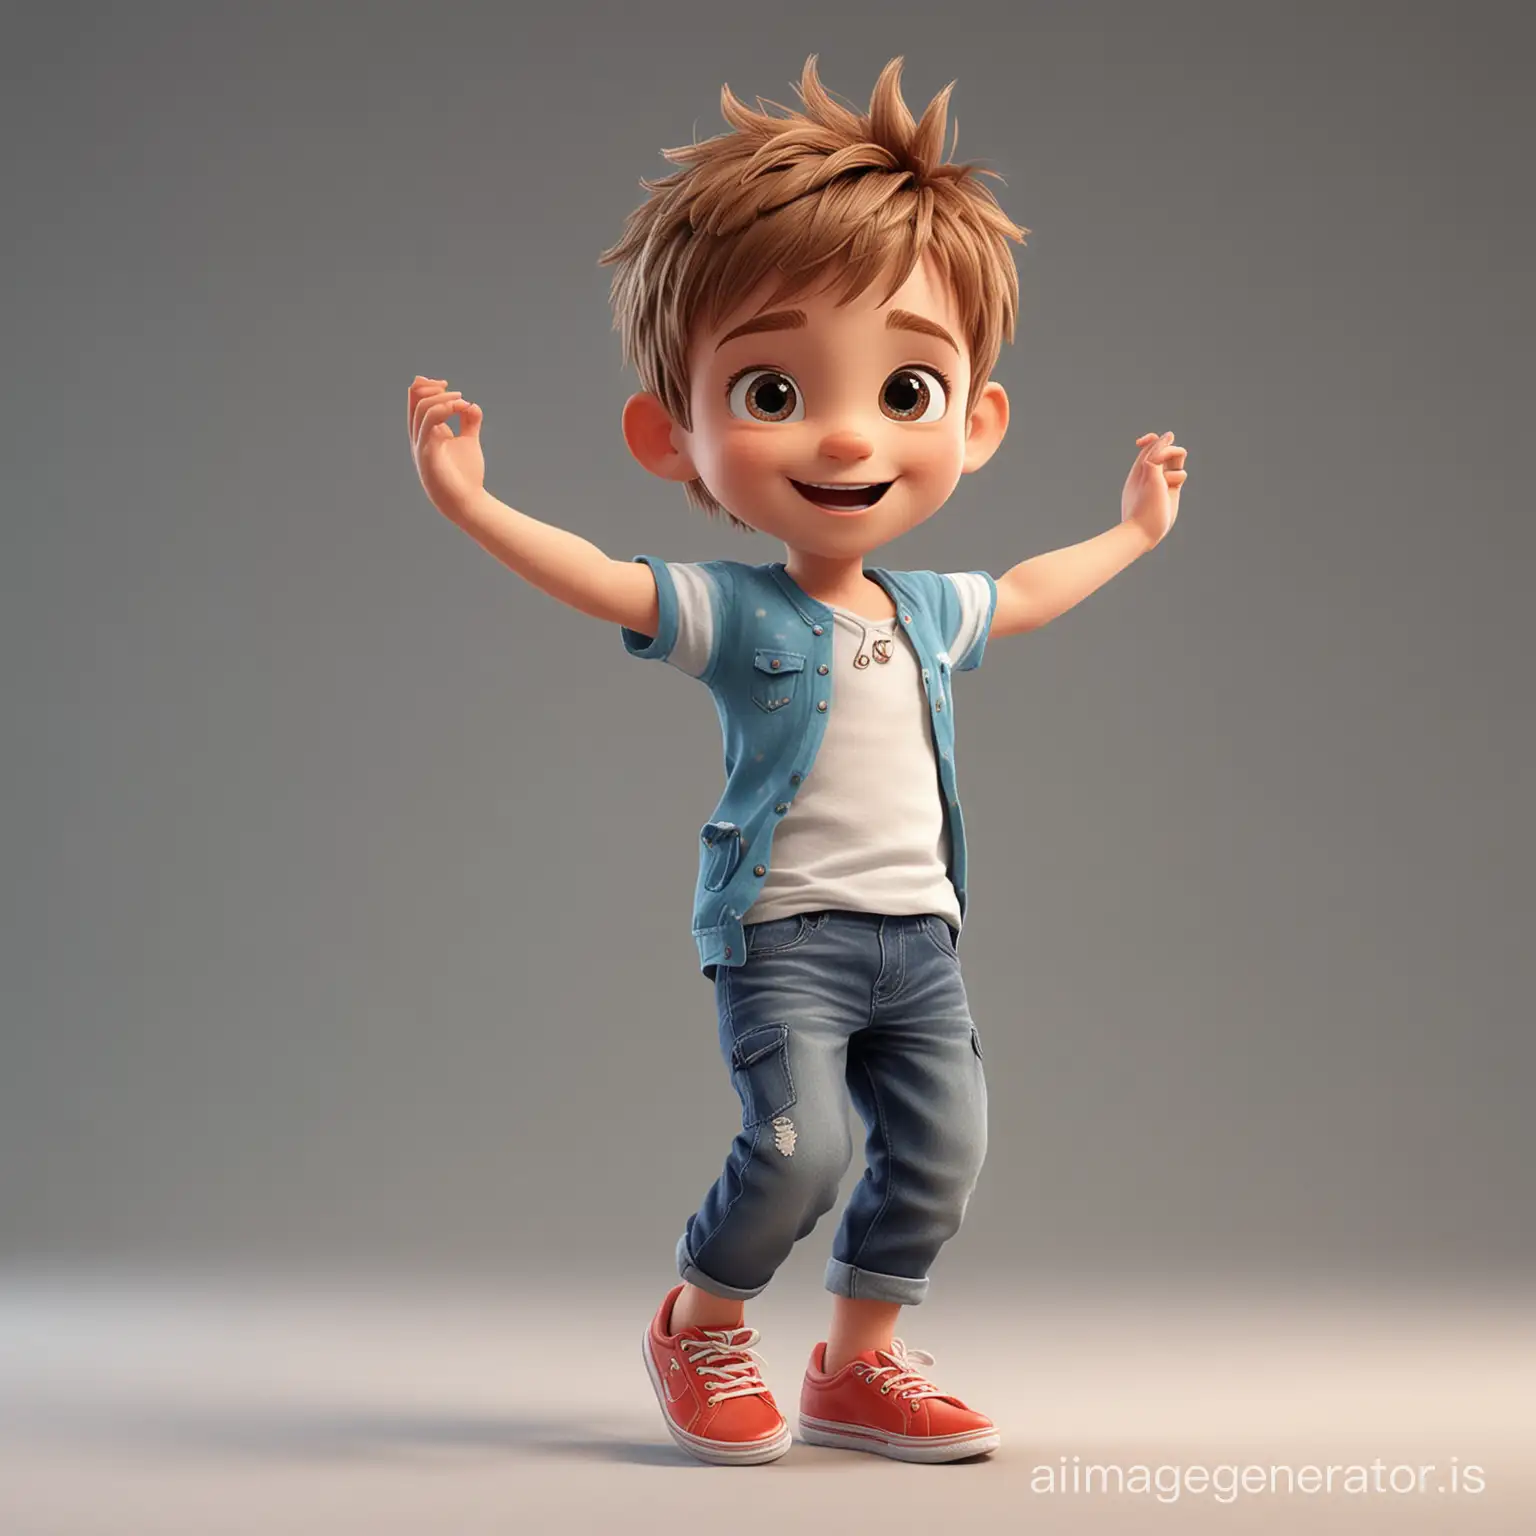 Cute-Boy-in-Summer-Outfit-Dancing-with-Joy